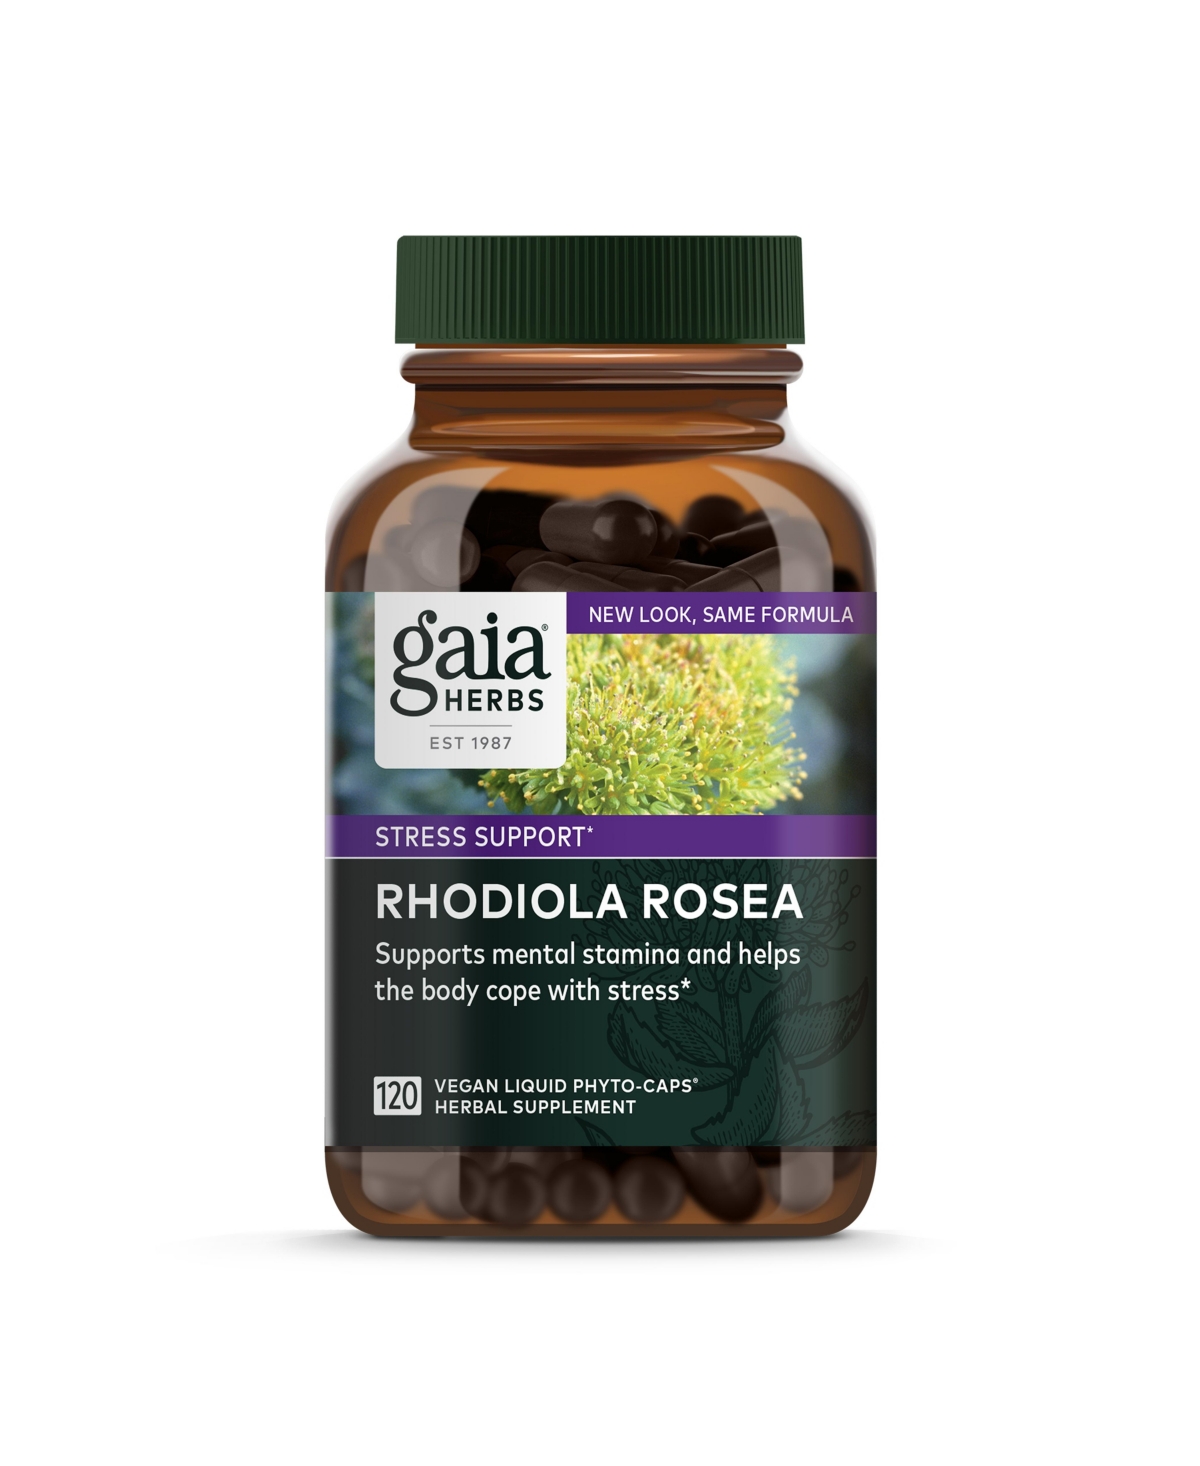 Rhodiola Rosea - Stress Support Supplement Traditionally for Supporting Healthy Stamina and Endurance - With Siberian Rhodiola Root Extract